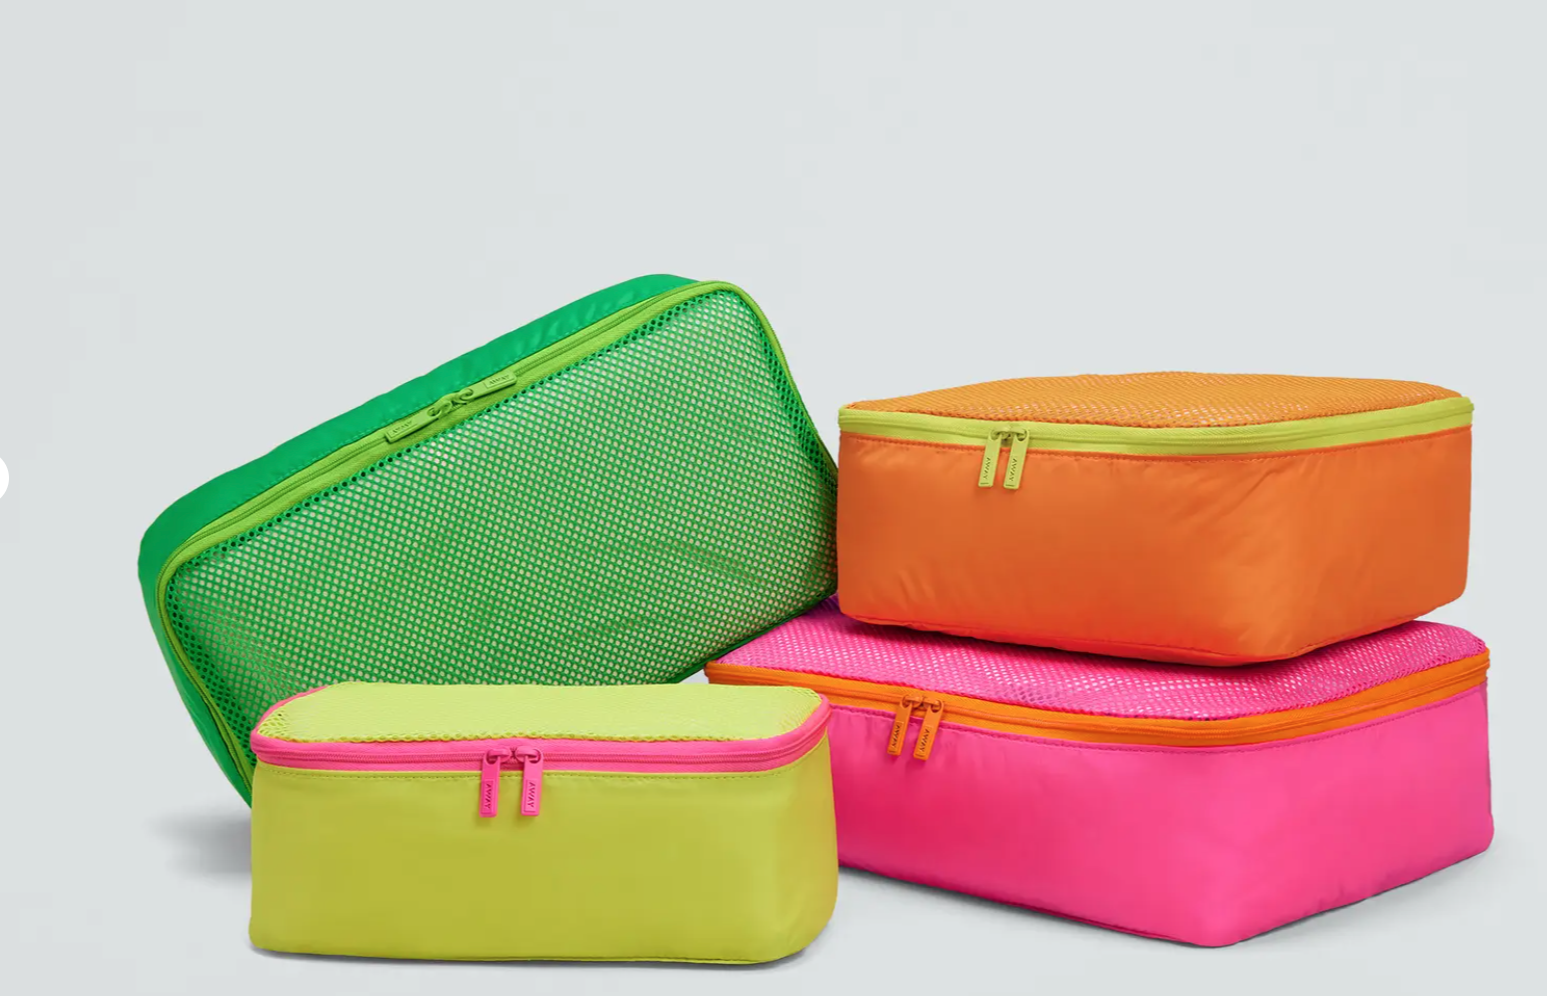 These Packing Cubes Are The Ultimate Travel Hack